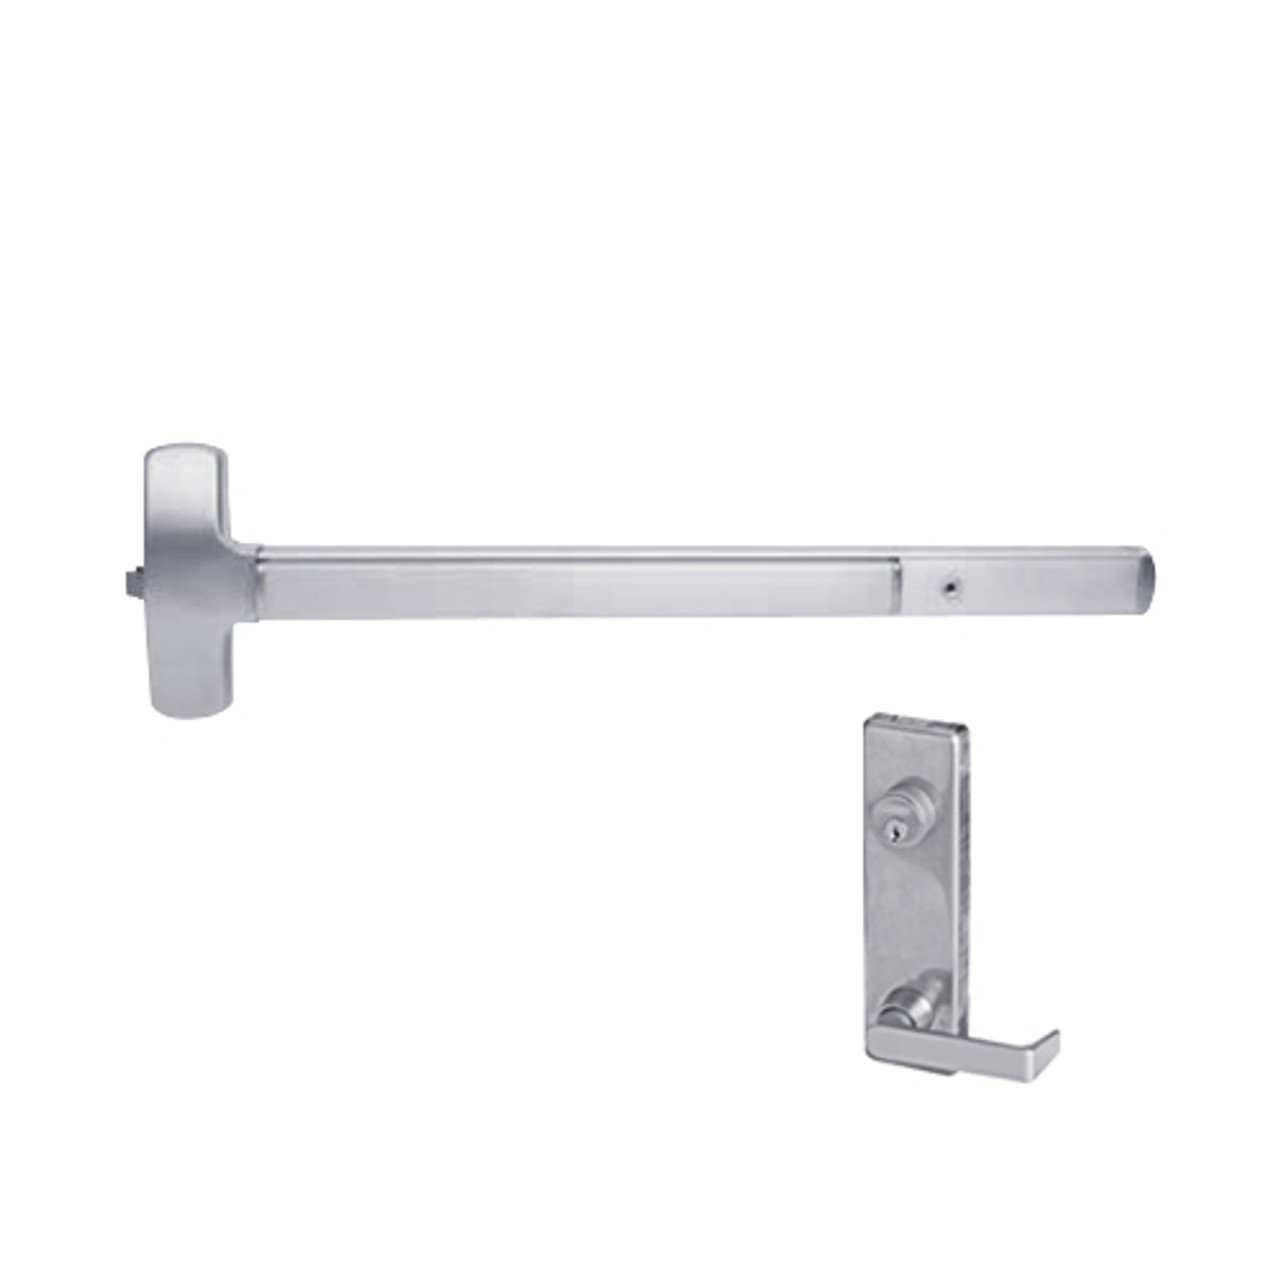 25-R-L-NL-DANE-US32-3-LHR Falcon Exit Device in Polished Stainless Steel